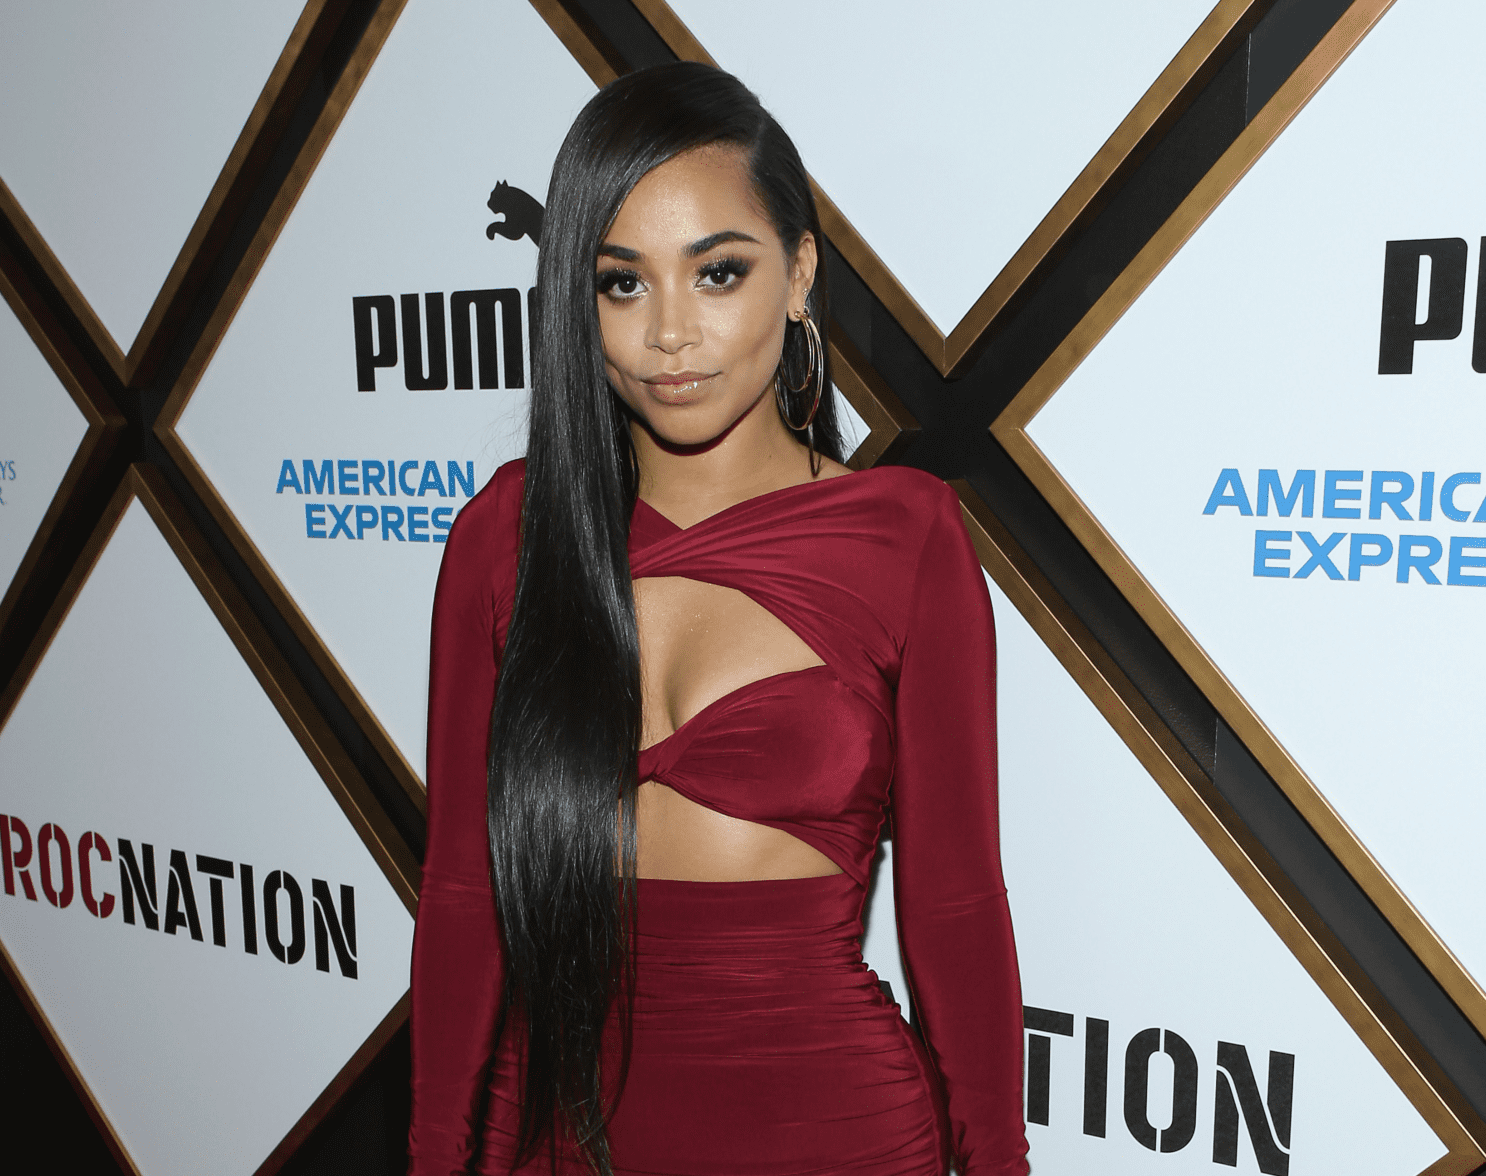 Lauren London Addresses Her Moving Forward With Grief